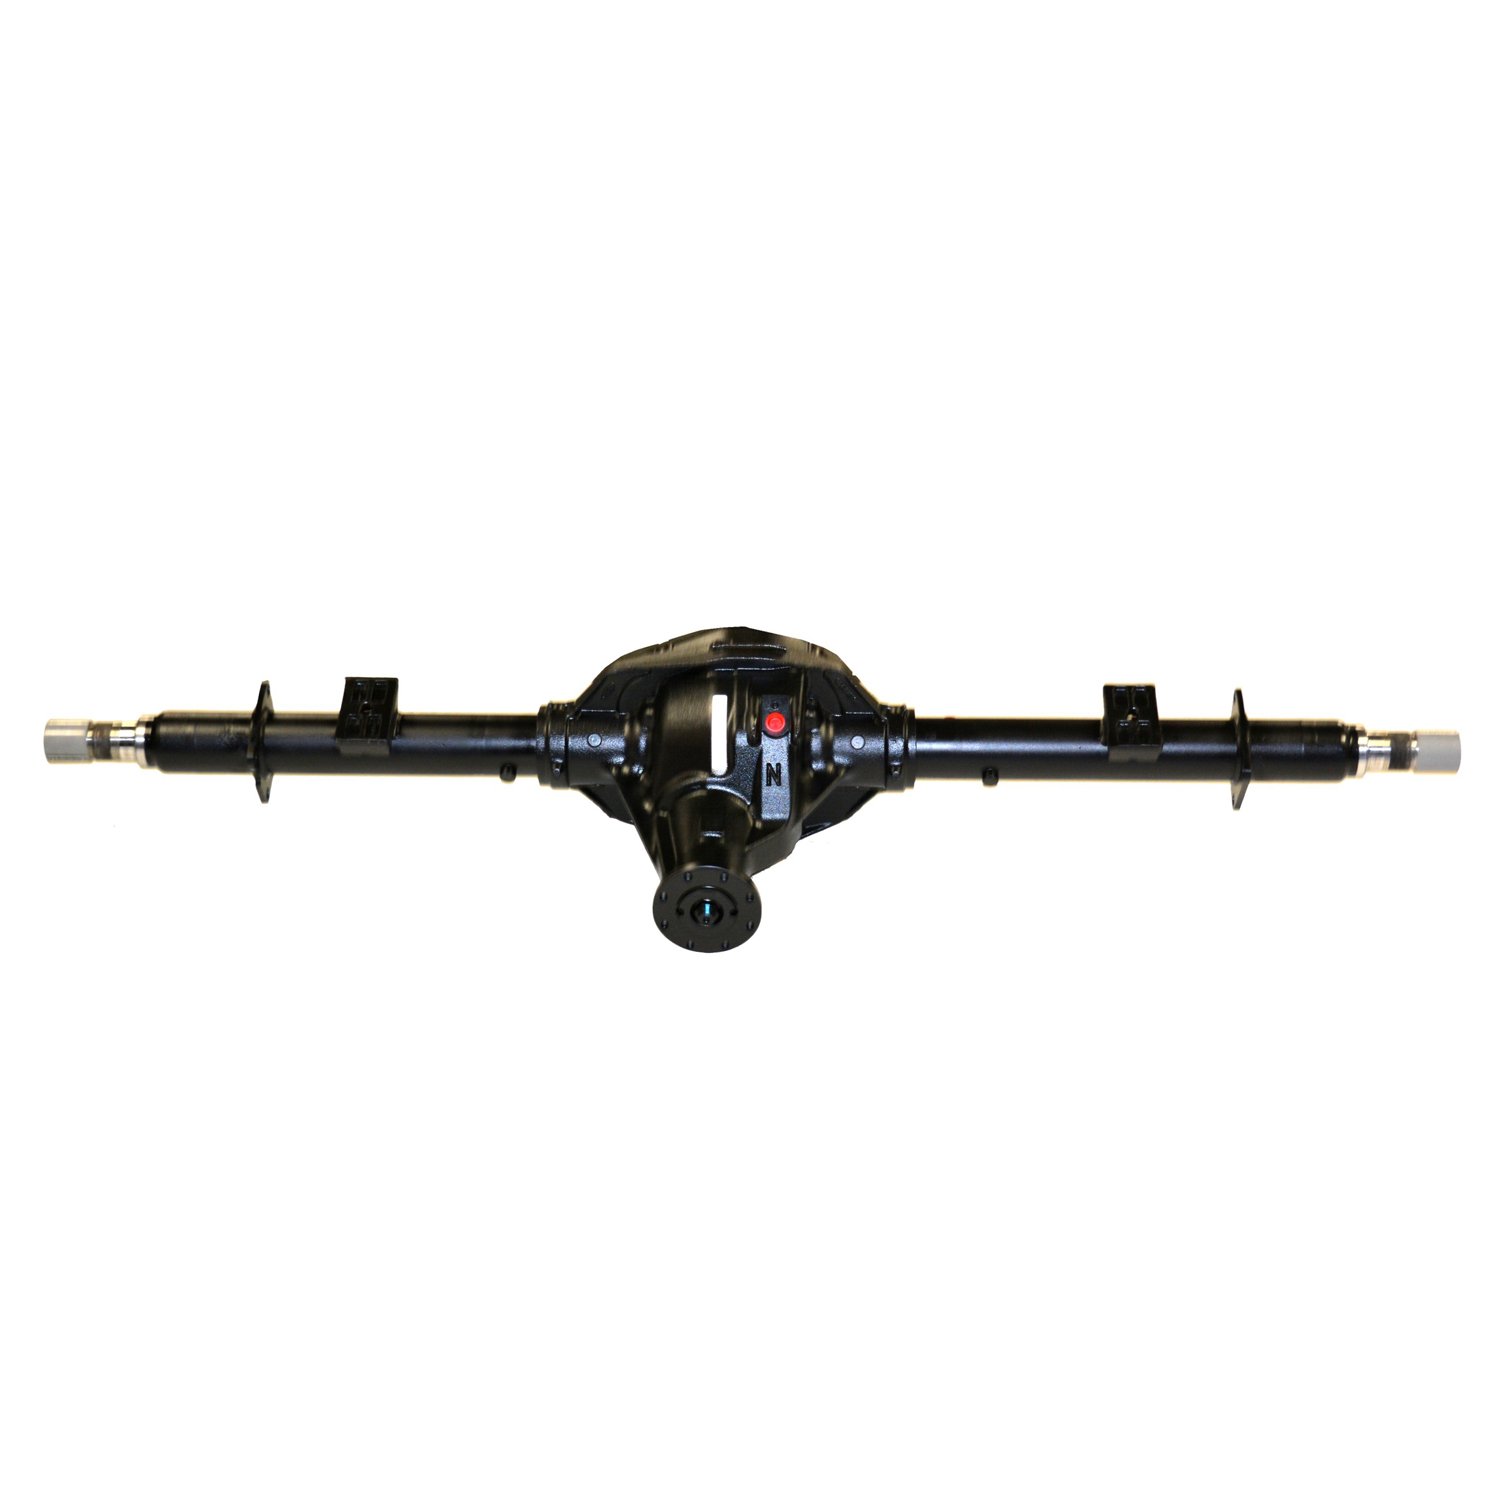 Remanufactured Axle Assy for 10.25" 87-97 F350 3.55 w/o ABS, DRW, Cab Chassis, Posi LSD